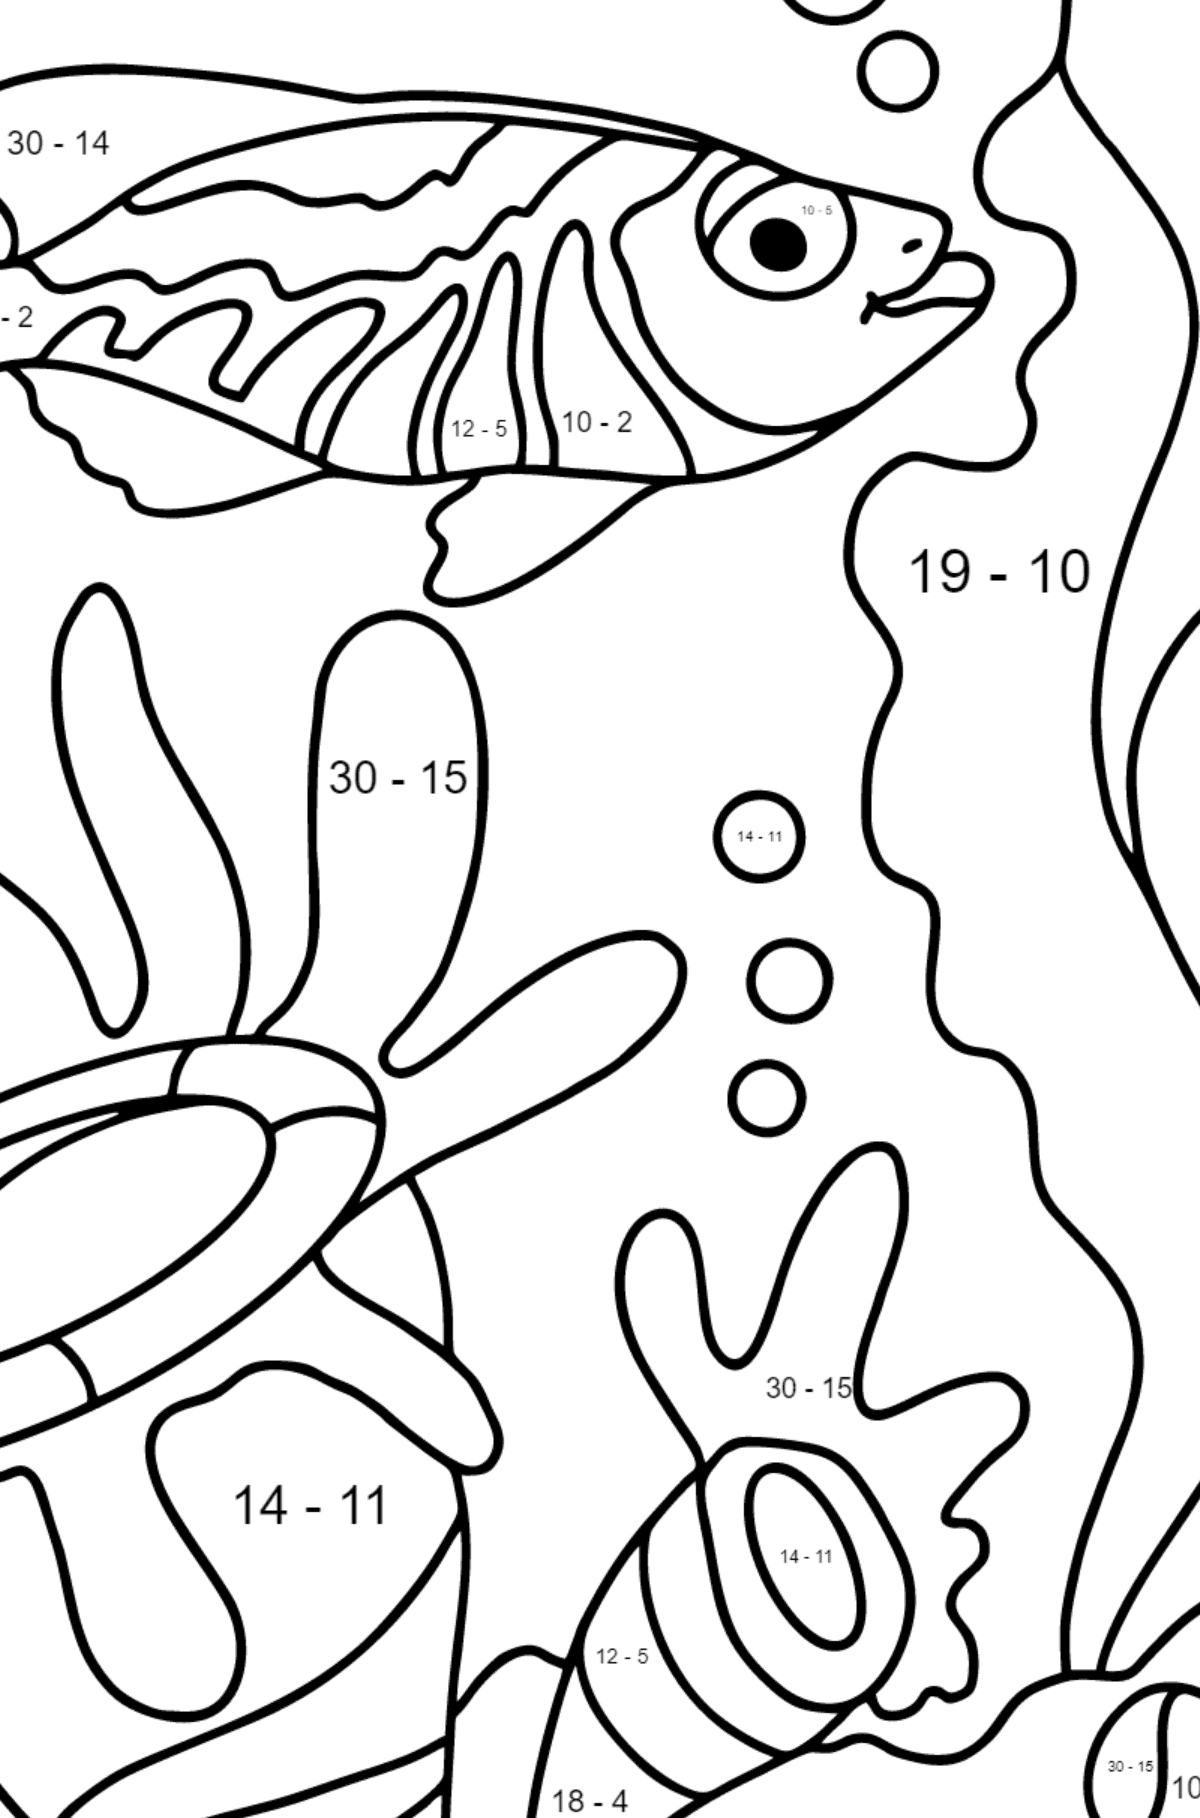 Coloring Page - A Fish is Admiring the Corals - Math Coloring - Subtraction for Kids